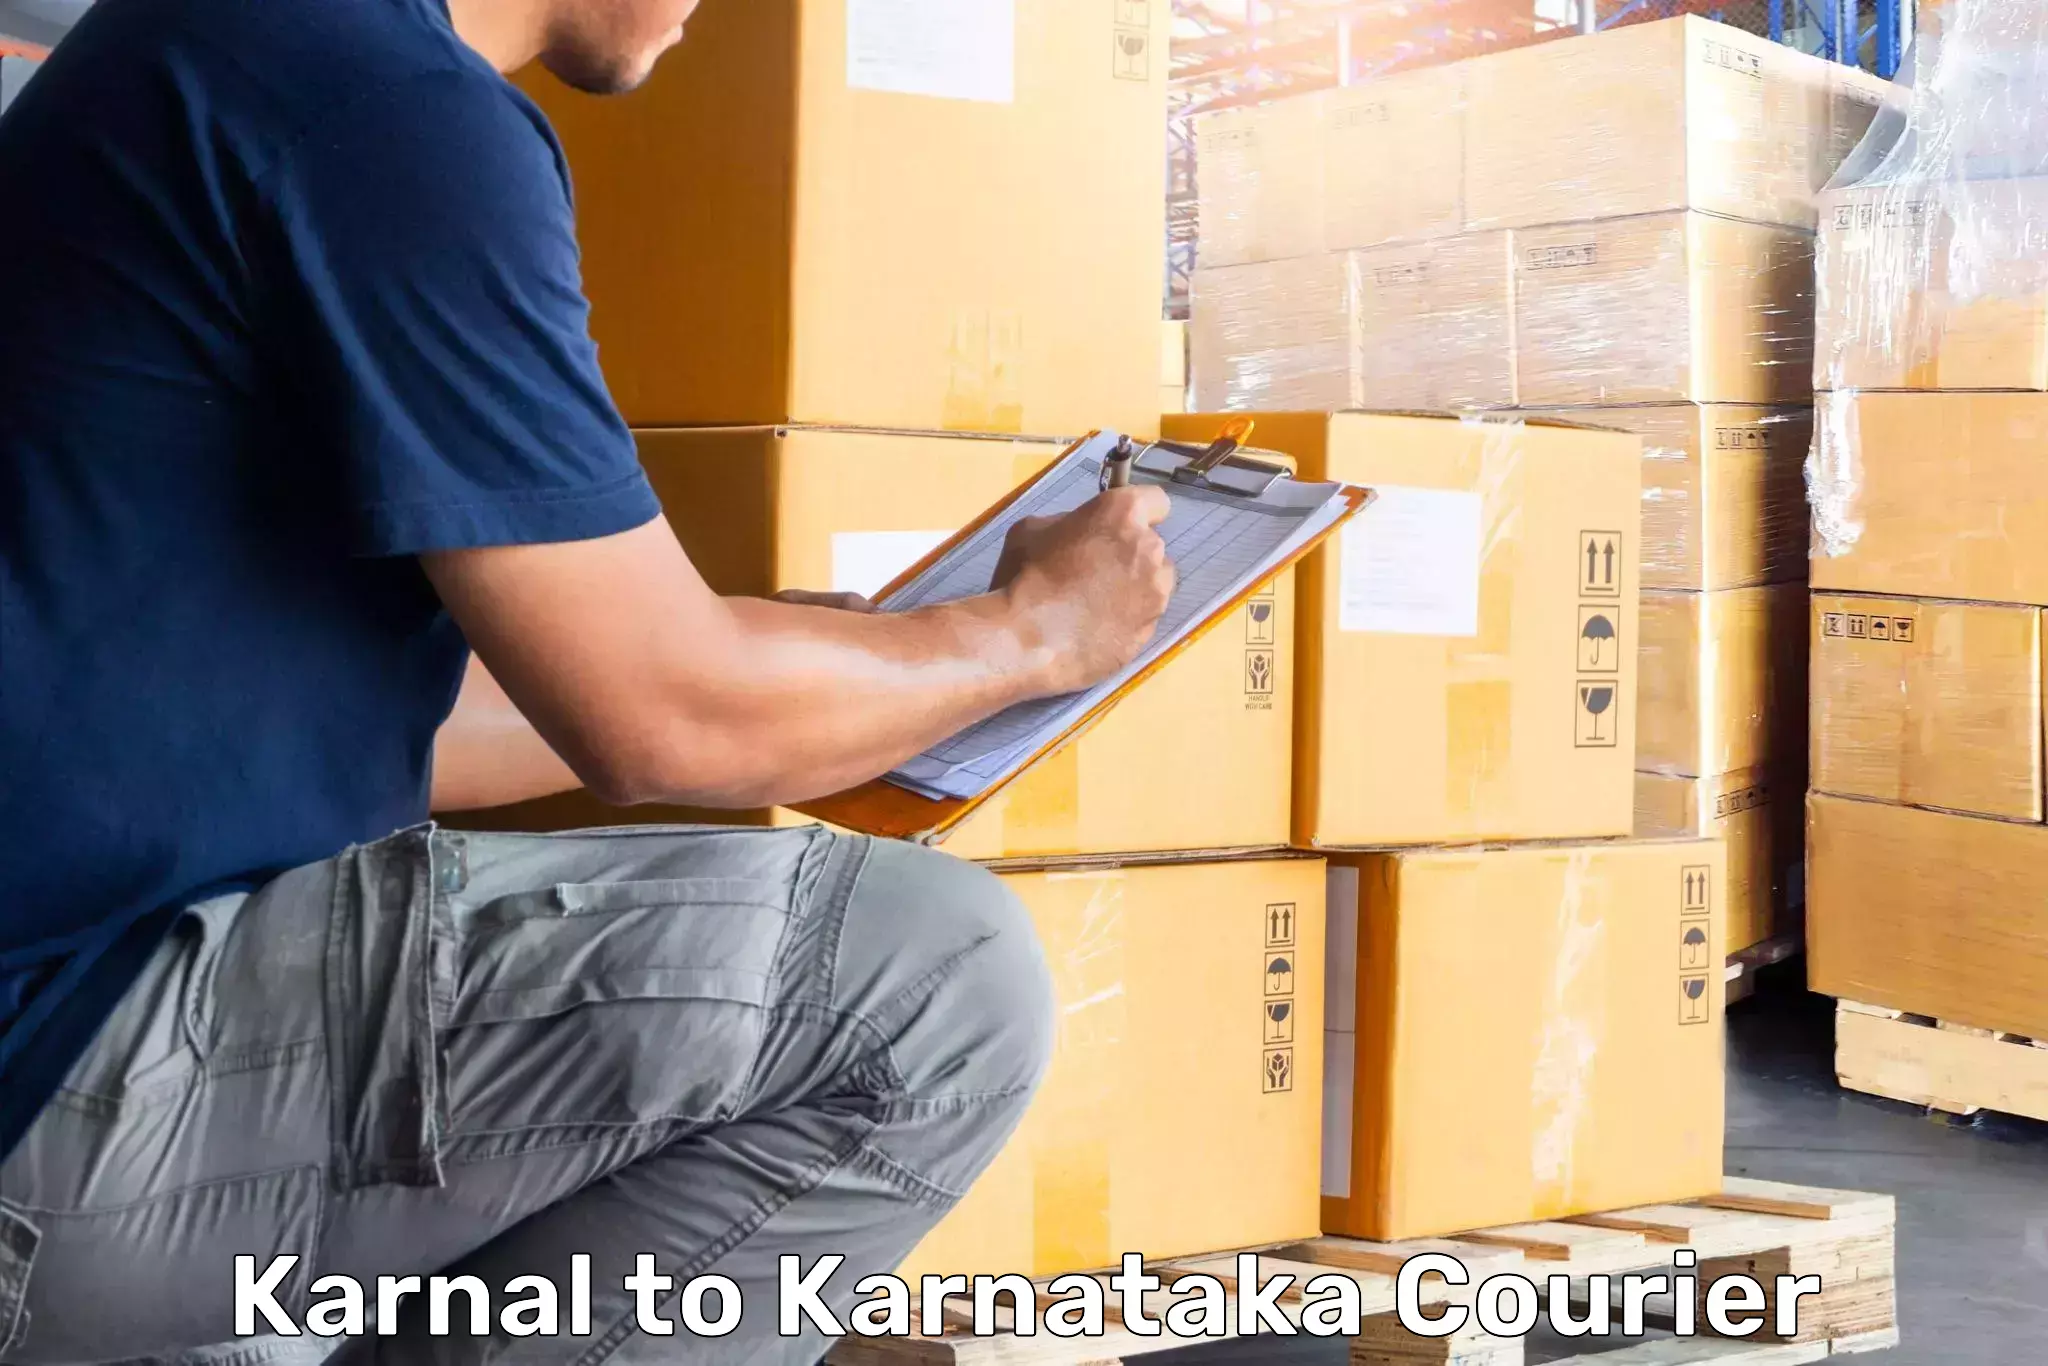 Luggage delivery app Karnal to Yellare